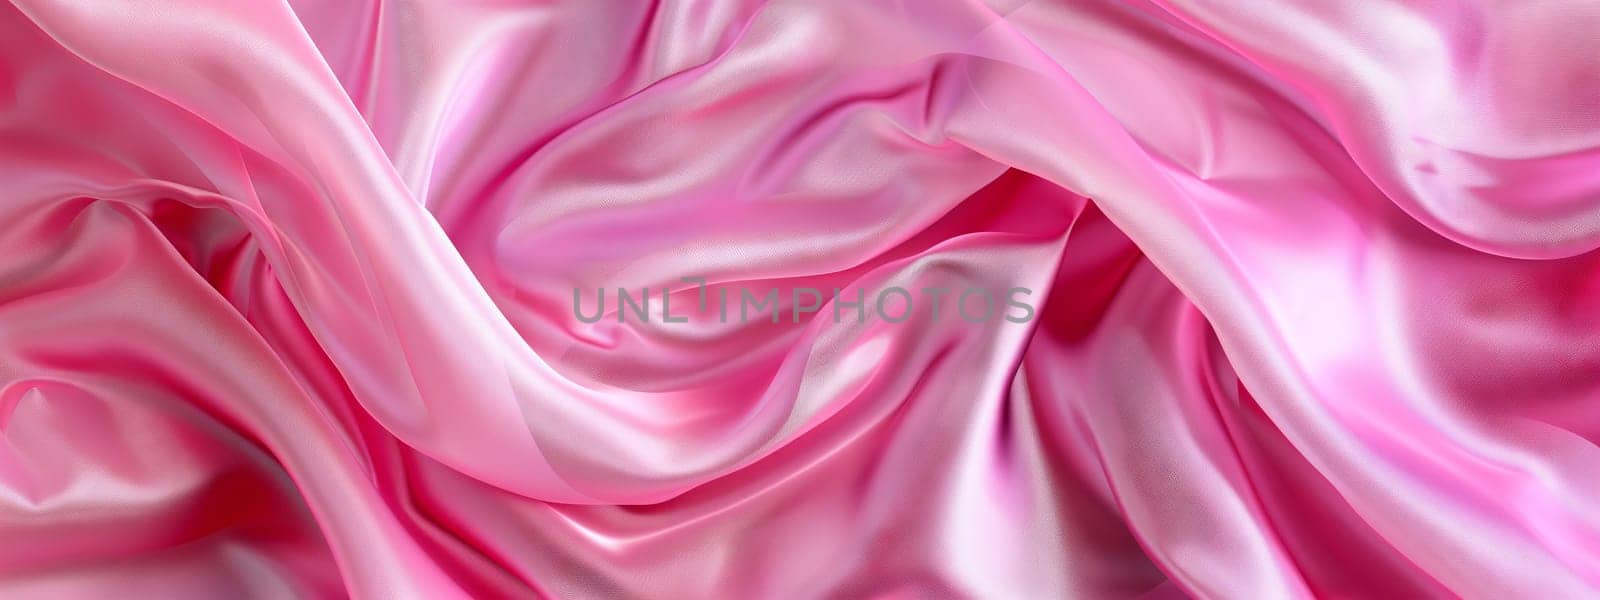 Close up of a vibrant pink satin fabric with intricate patterns by richwolf